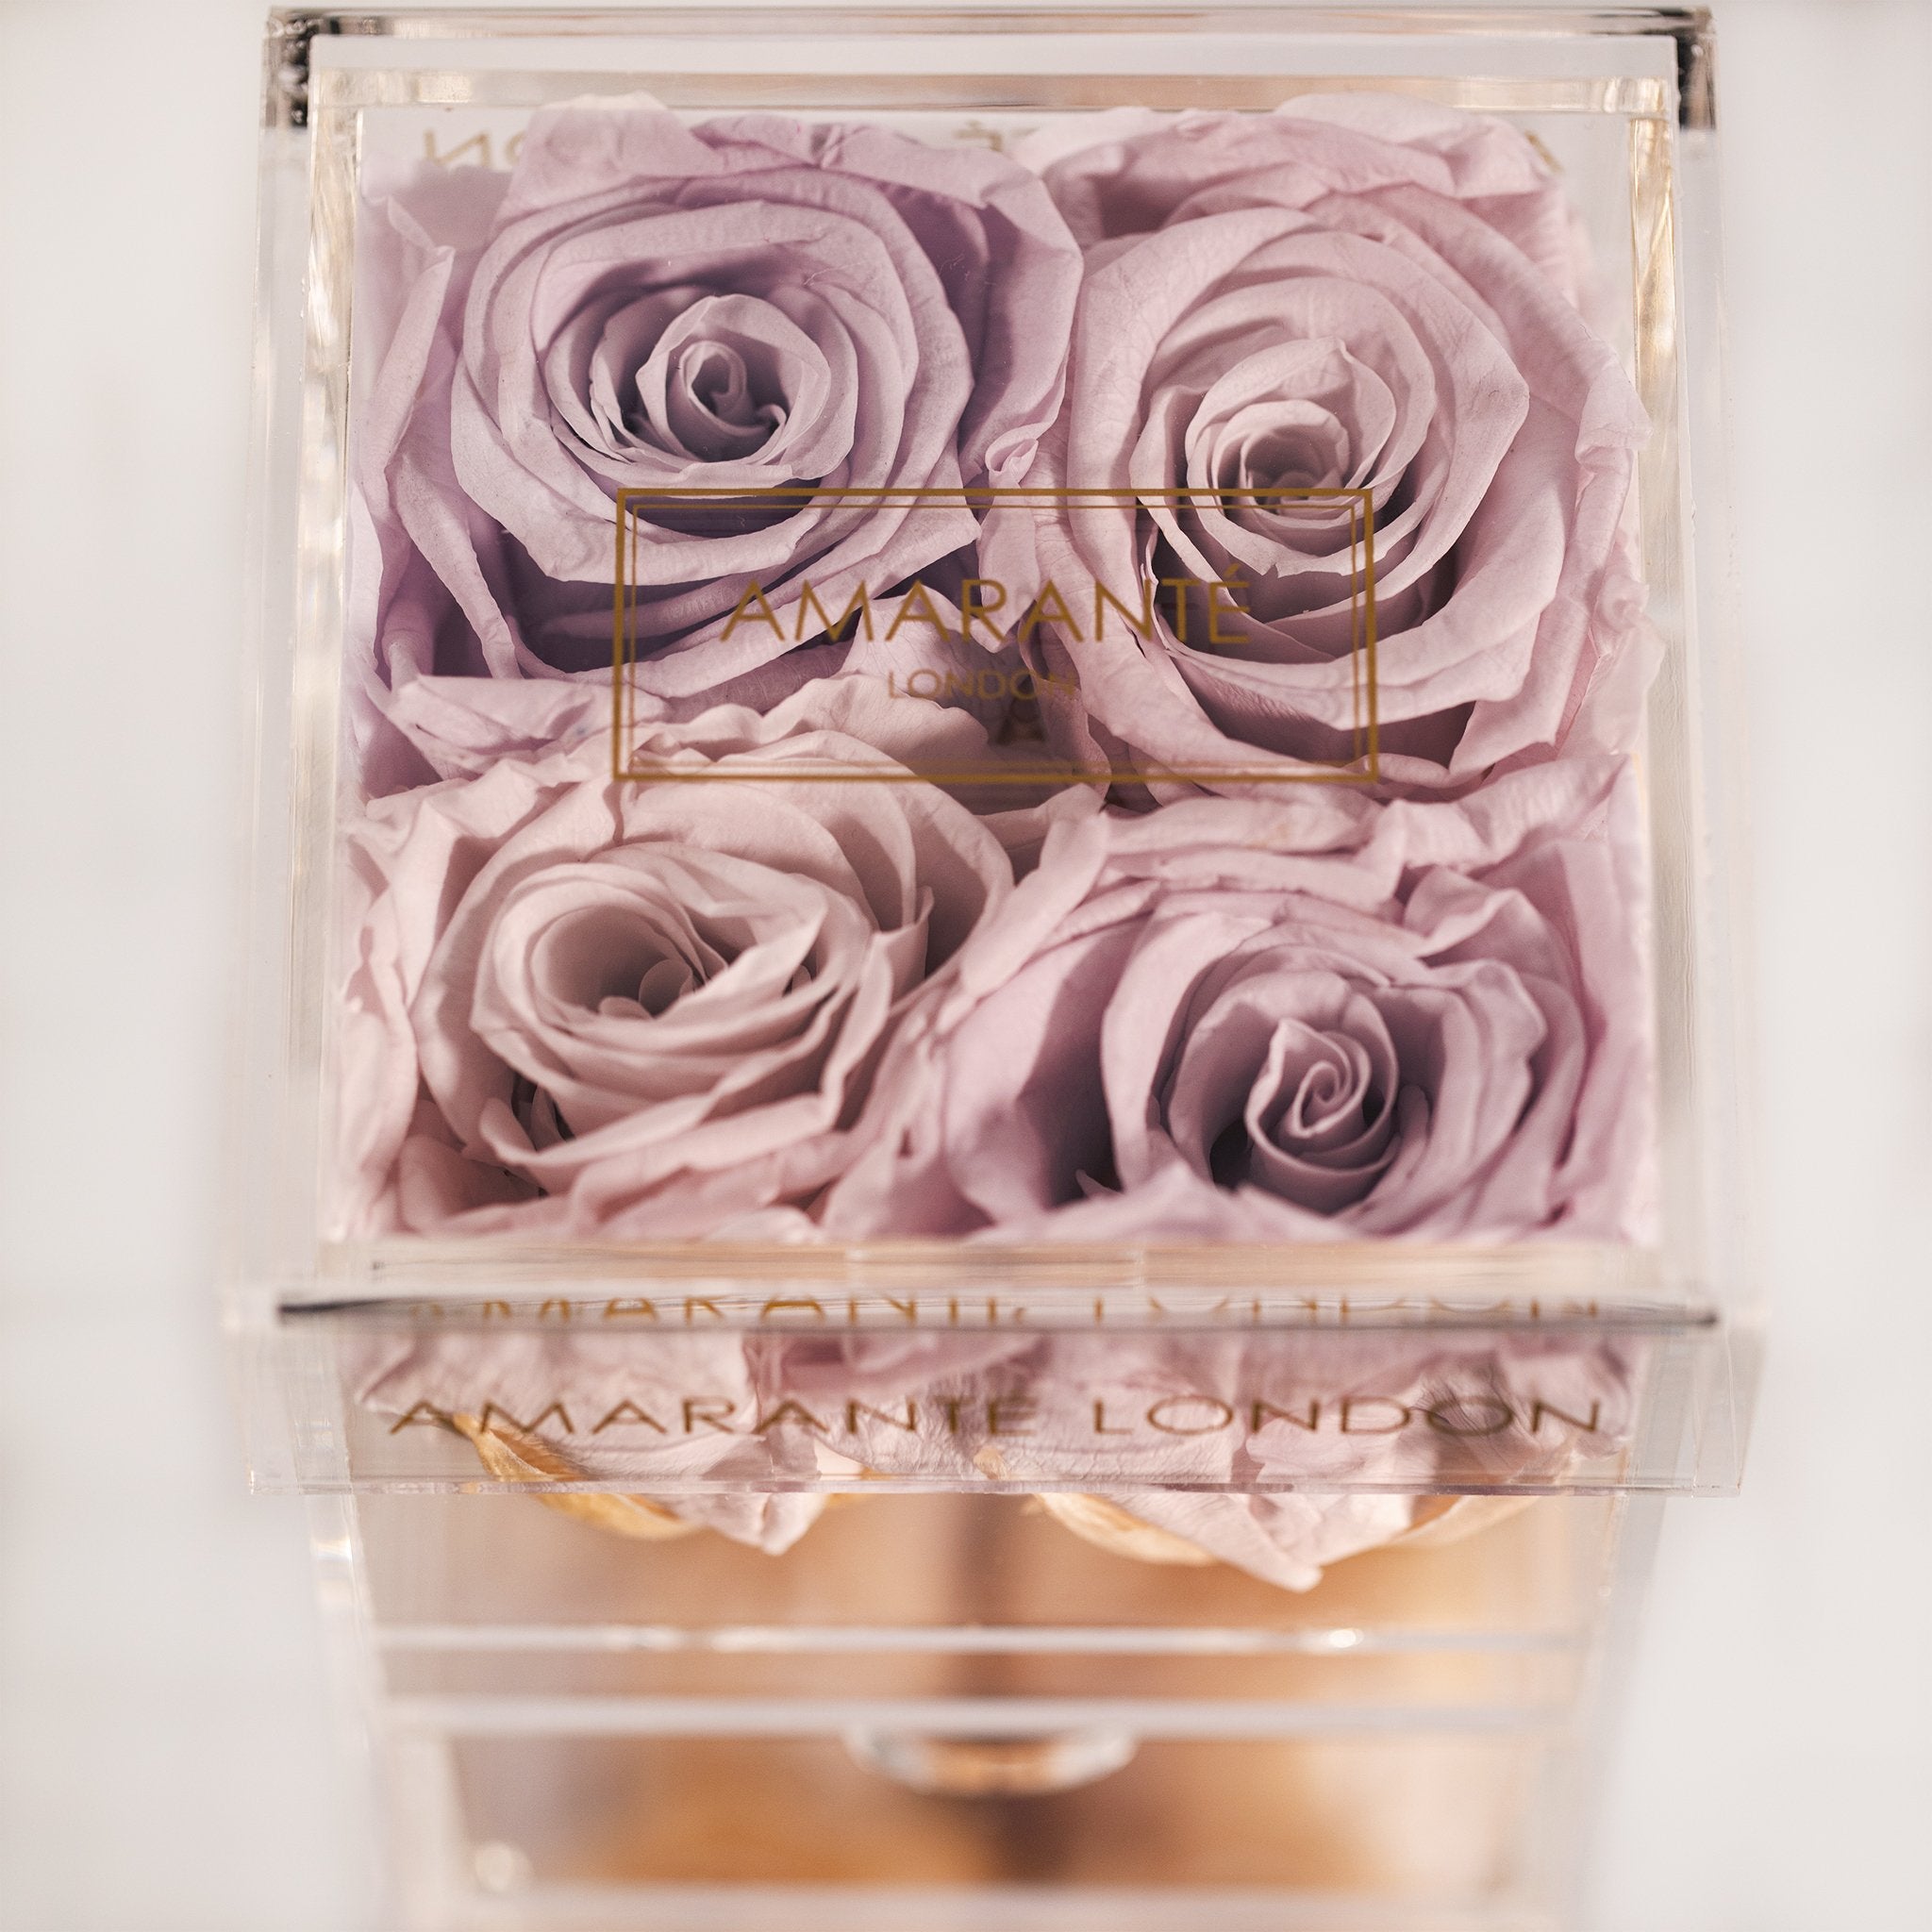 Artful lavender roses expressing calmness and peace 